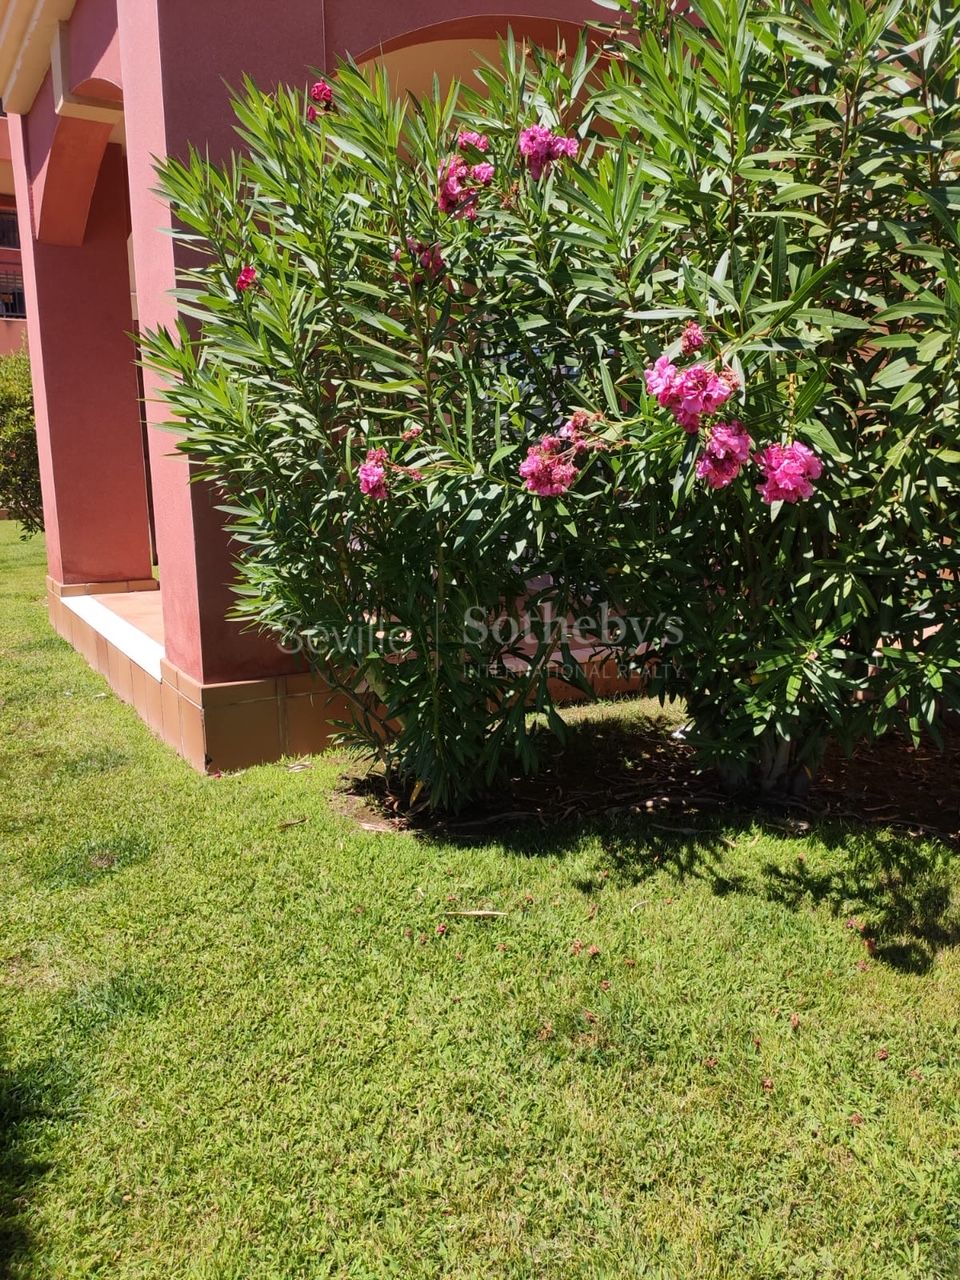 Apartment with private garden or terrace with tourist license